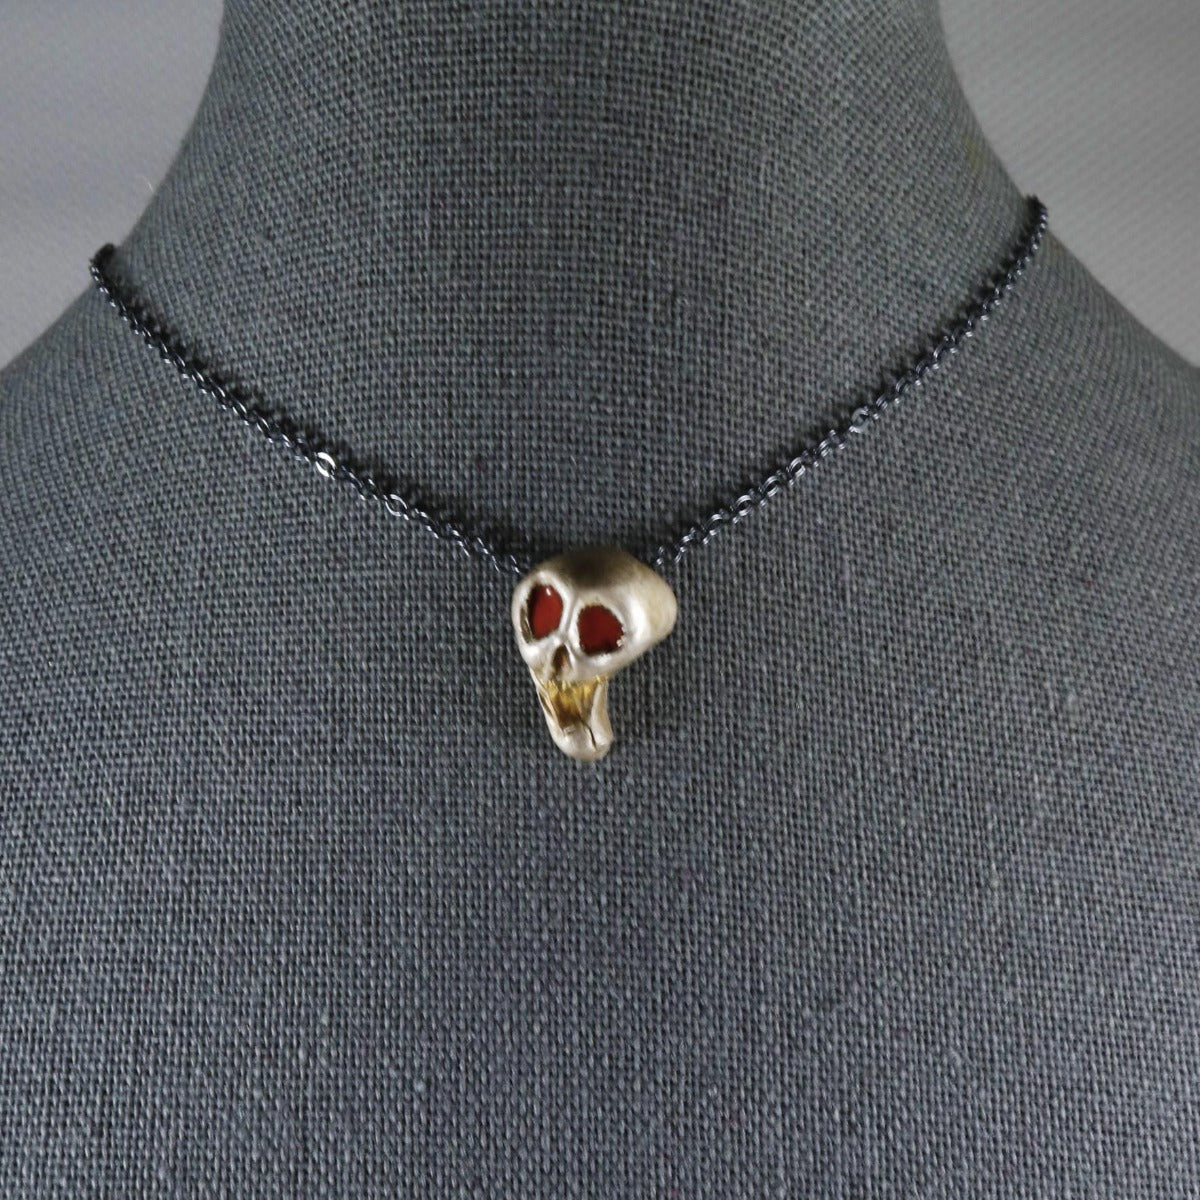 Handmade necklace - fine silver jewelry; screaming skull with red eyes necklace; small skull pendant; skull with red enamel eyes; Susan Hicks; Melasdesign Handmade Shop; Halloween jewelry; goth prom; gothic outfit